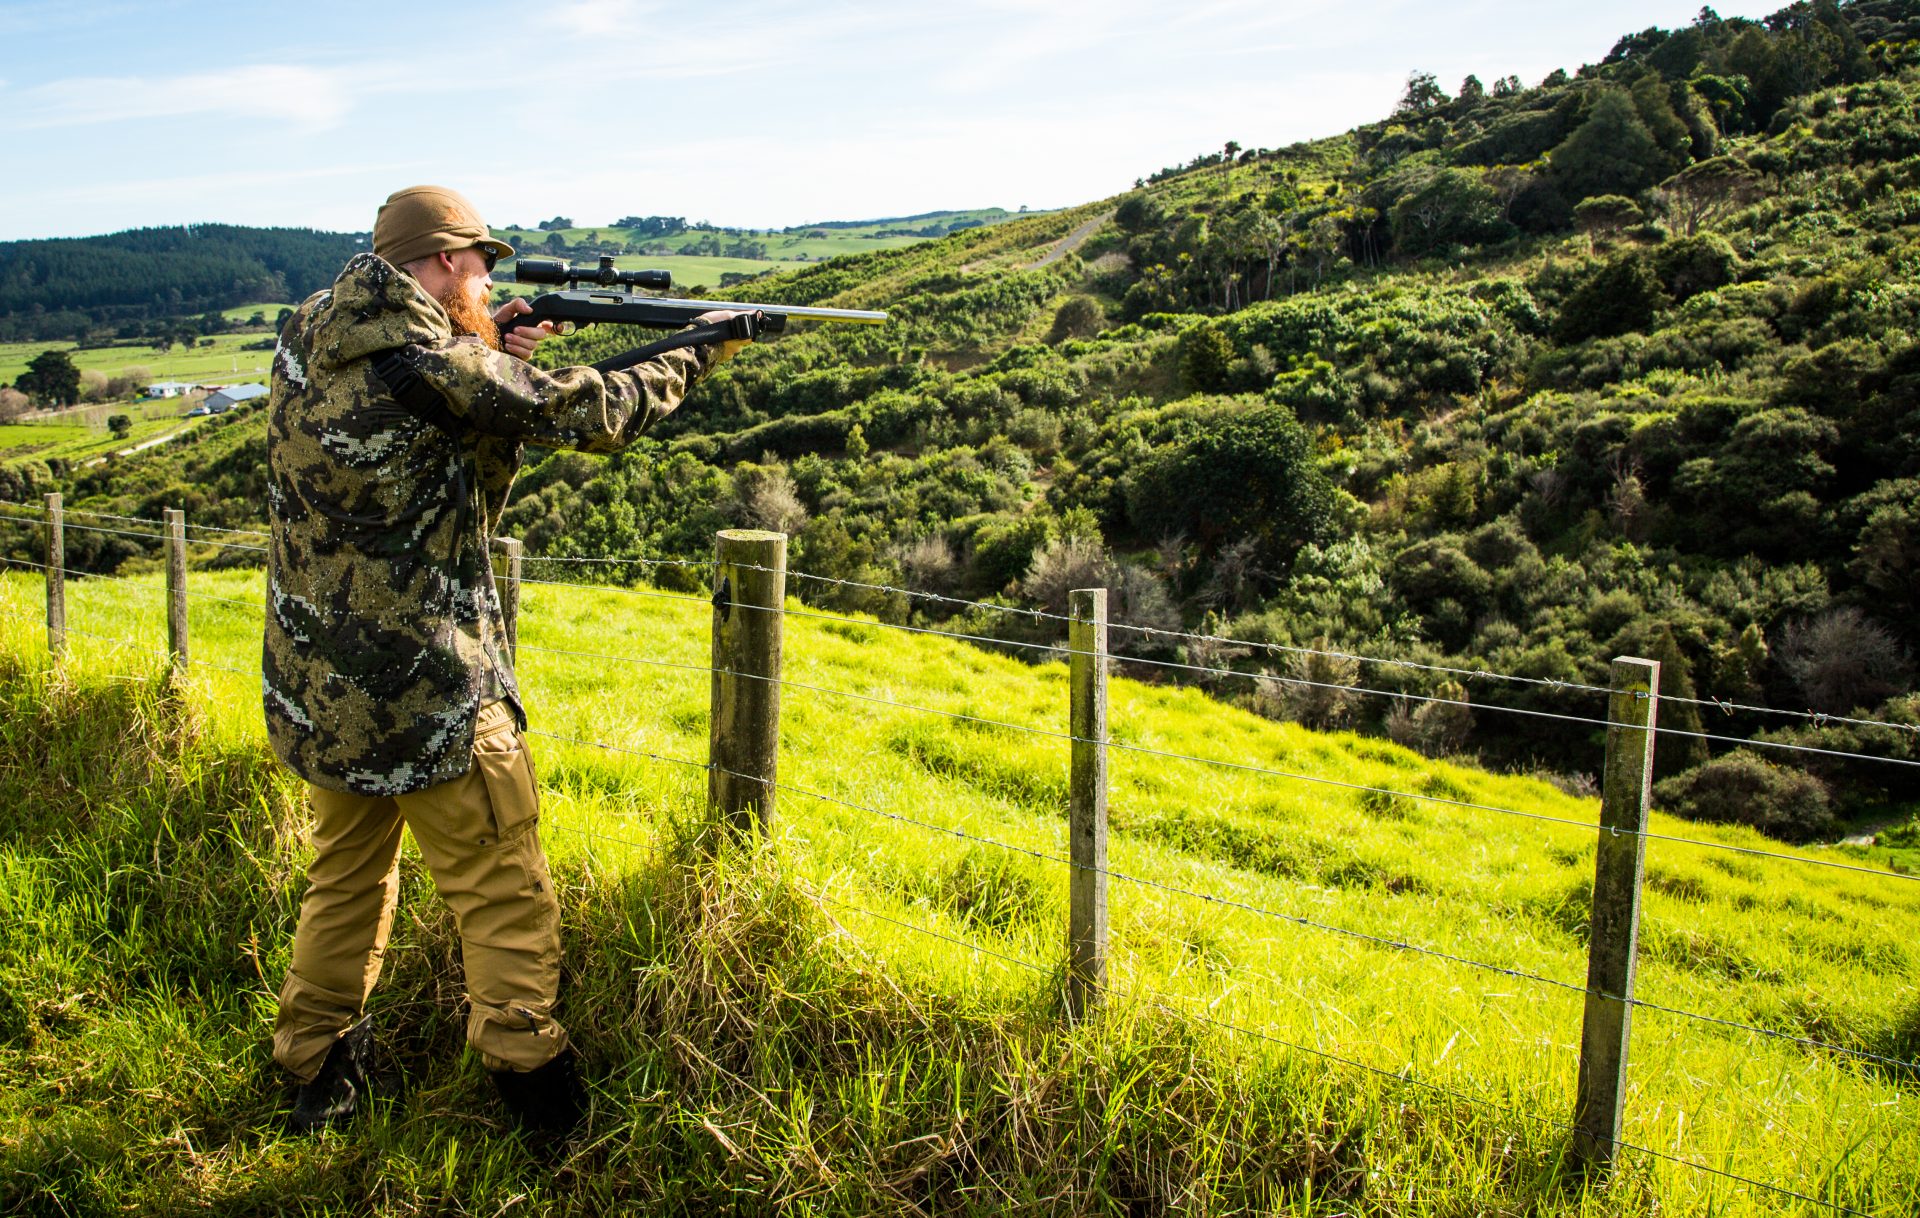 New Zealand Firearms Licence, Your 2021 definitive guide to getting your New Zealand Firearms Licence.